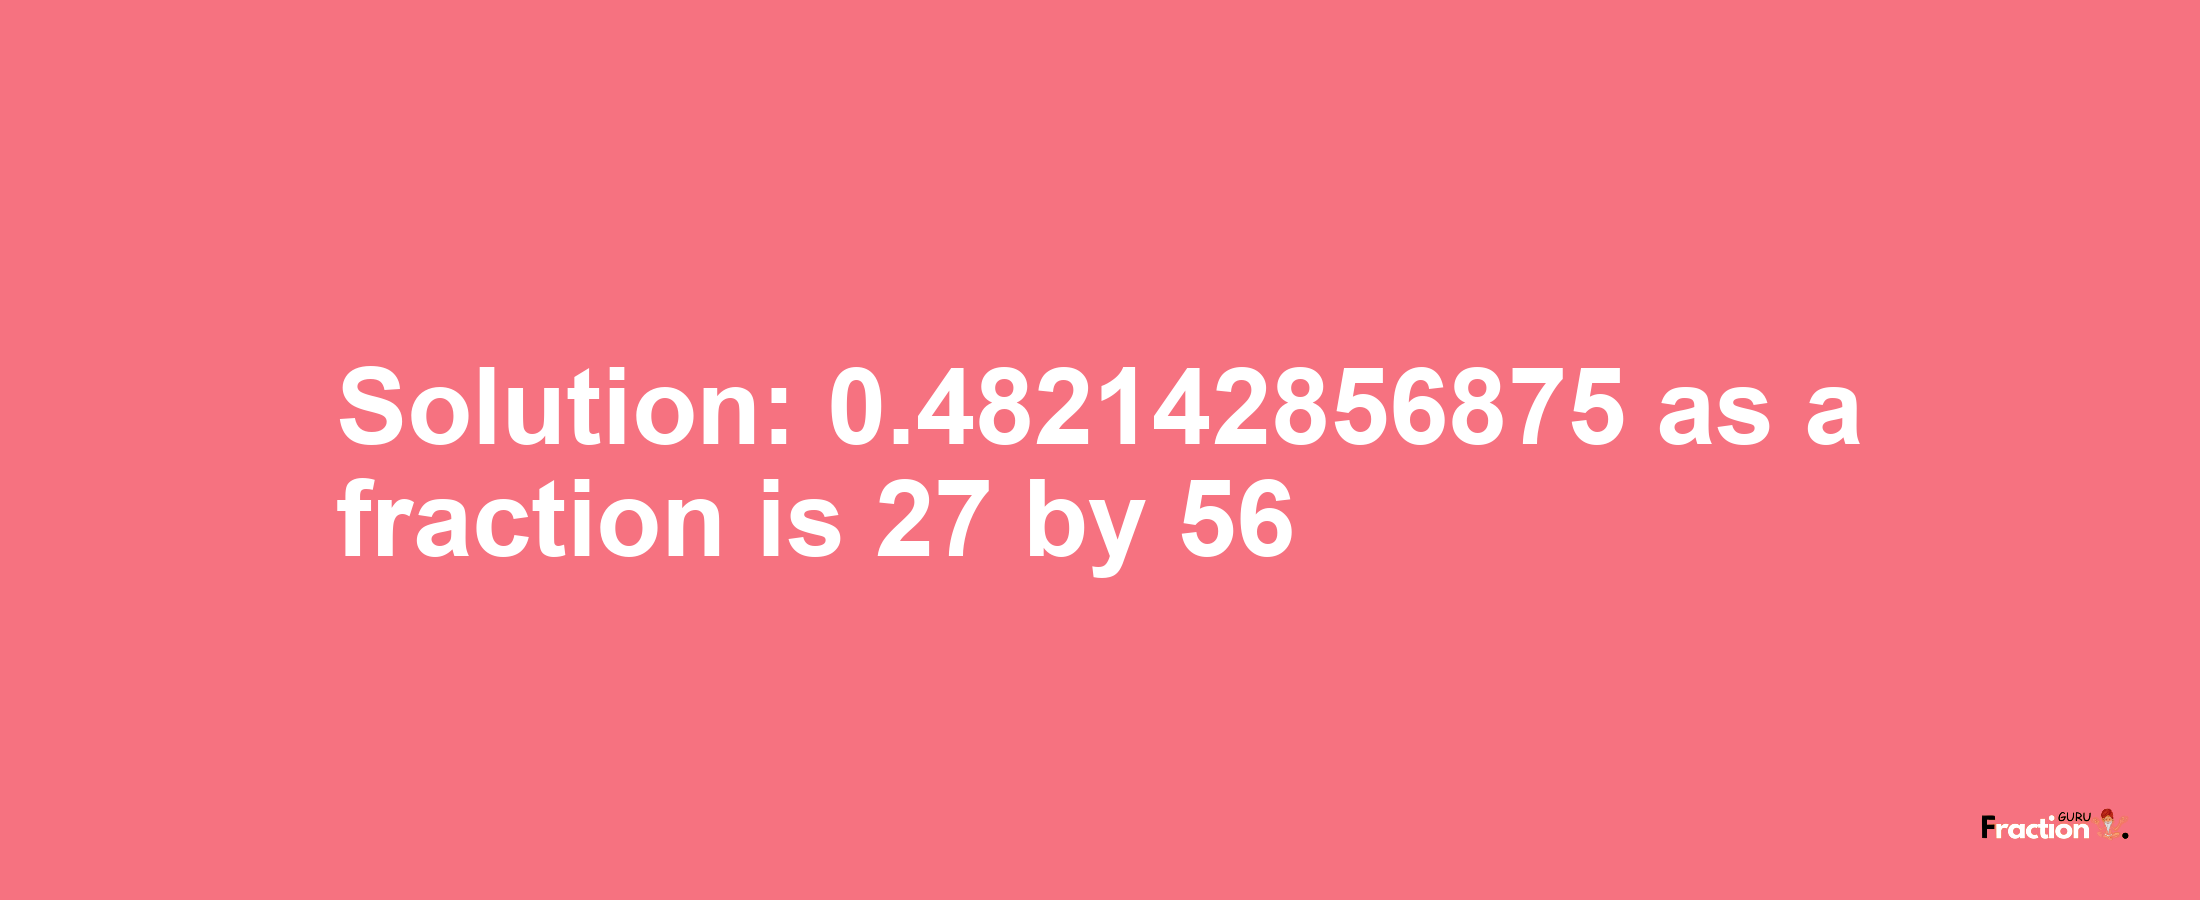 Solution:0.482142856875 as a fraction is 27/56